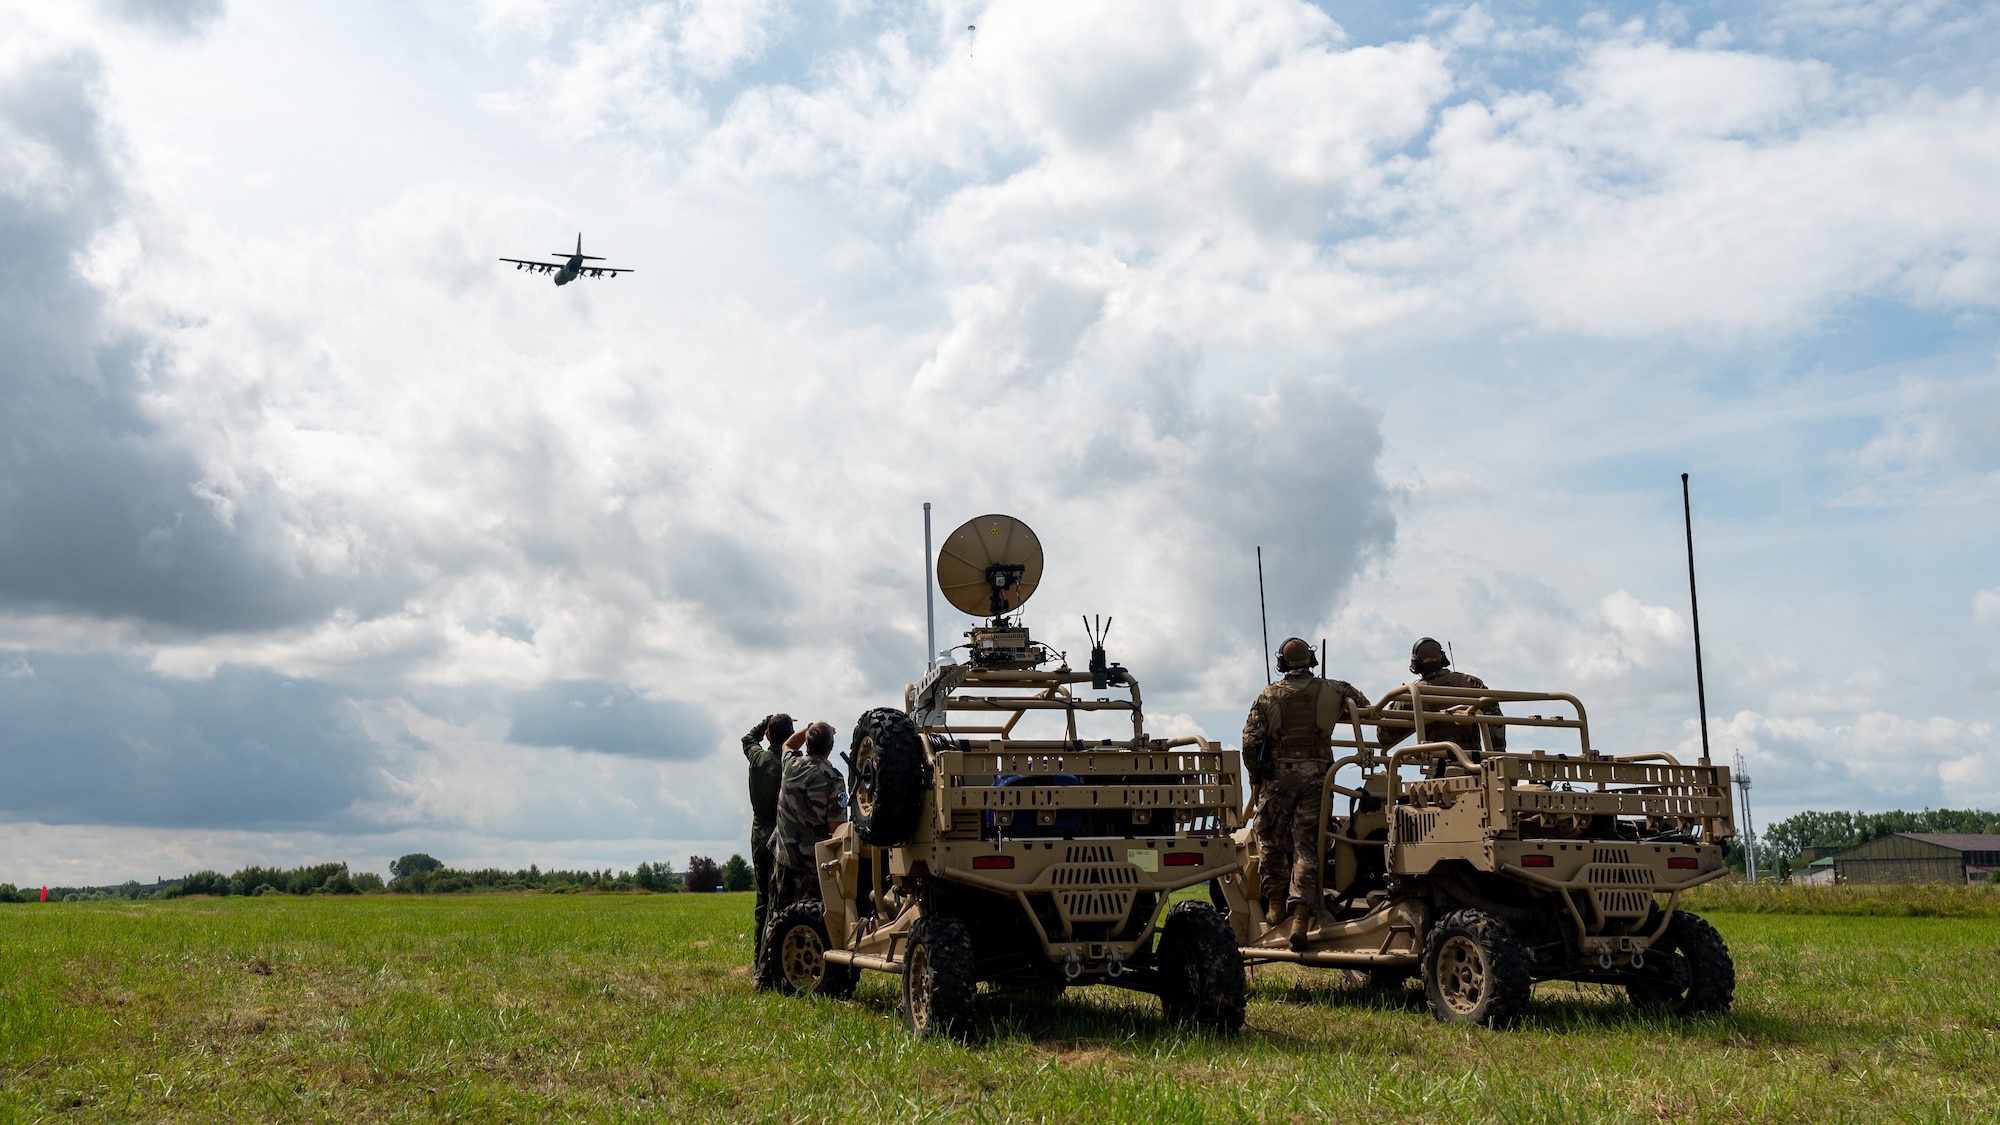 People standing next to vehicles in a field and looking at an aircraft flying in the distance.